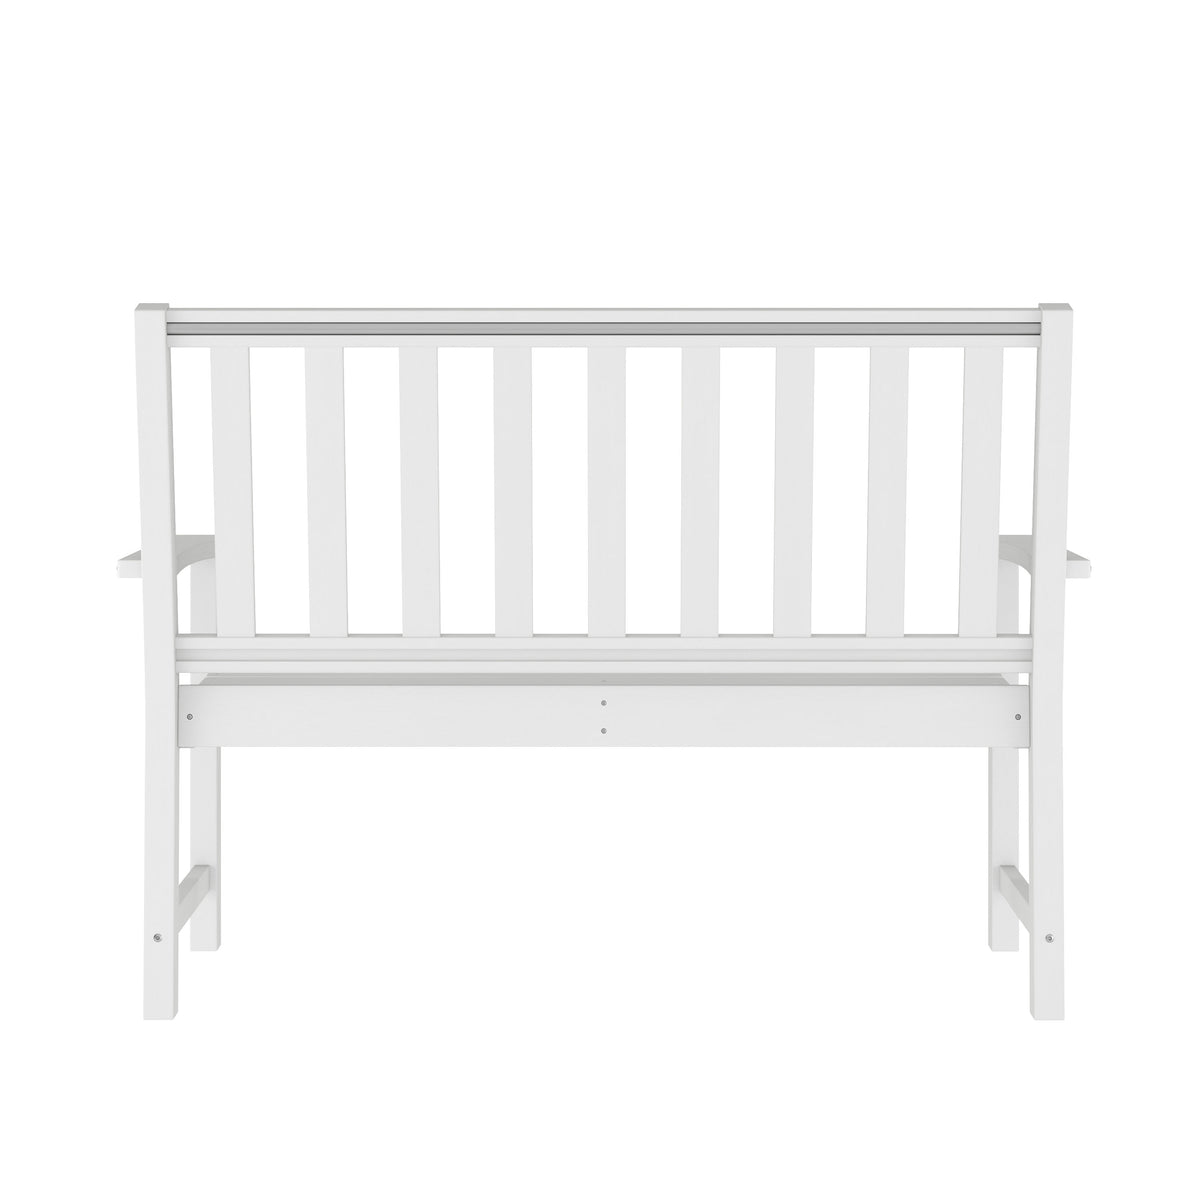 White |#| All Weather Heavy Duty Commercial Recycled HDPE Bench with Curved Seat in White